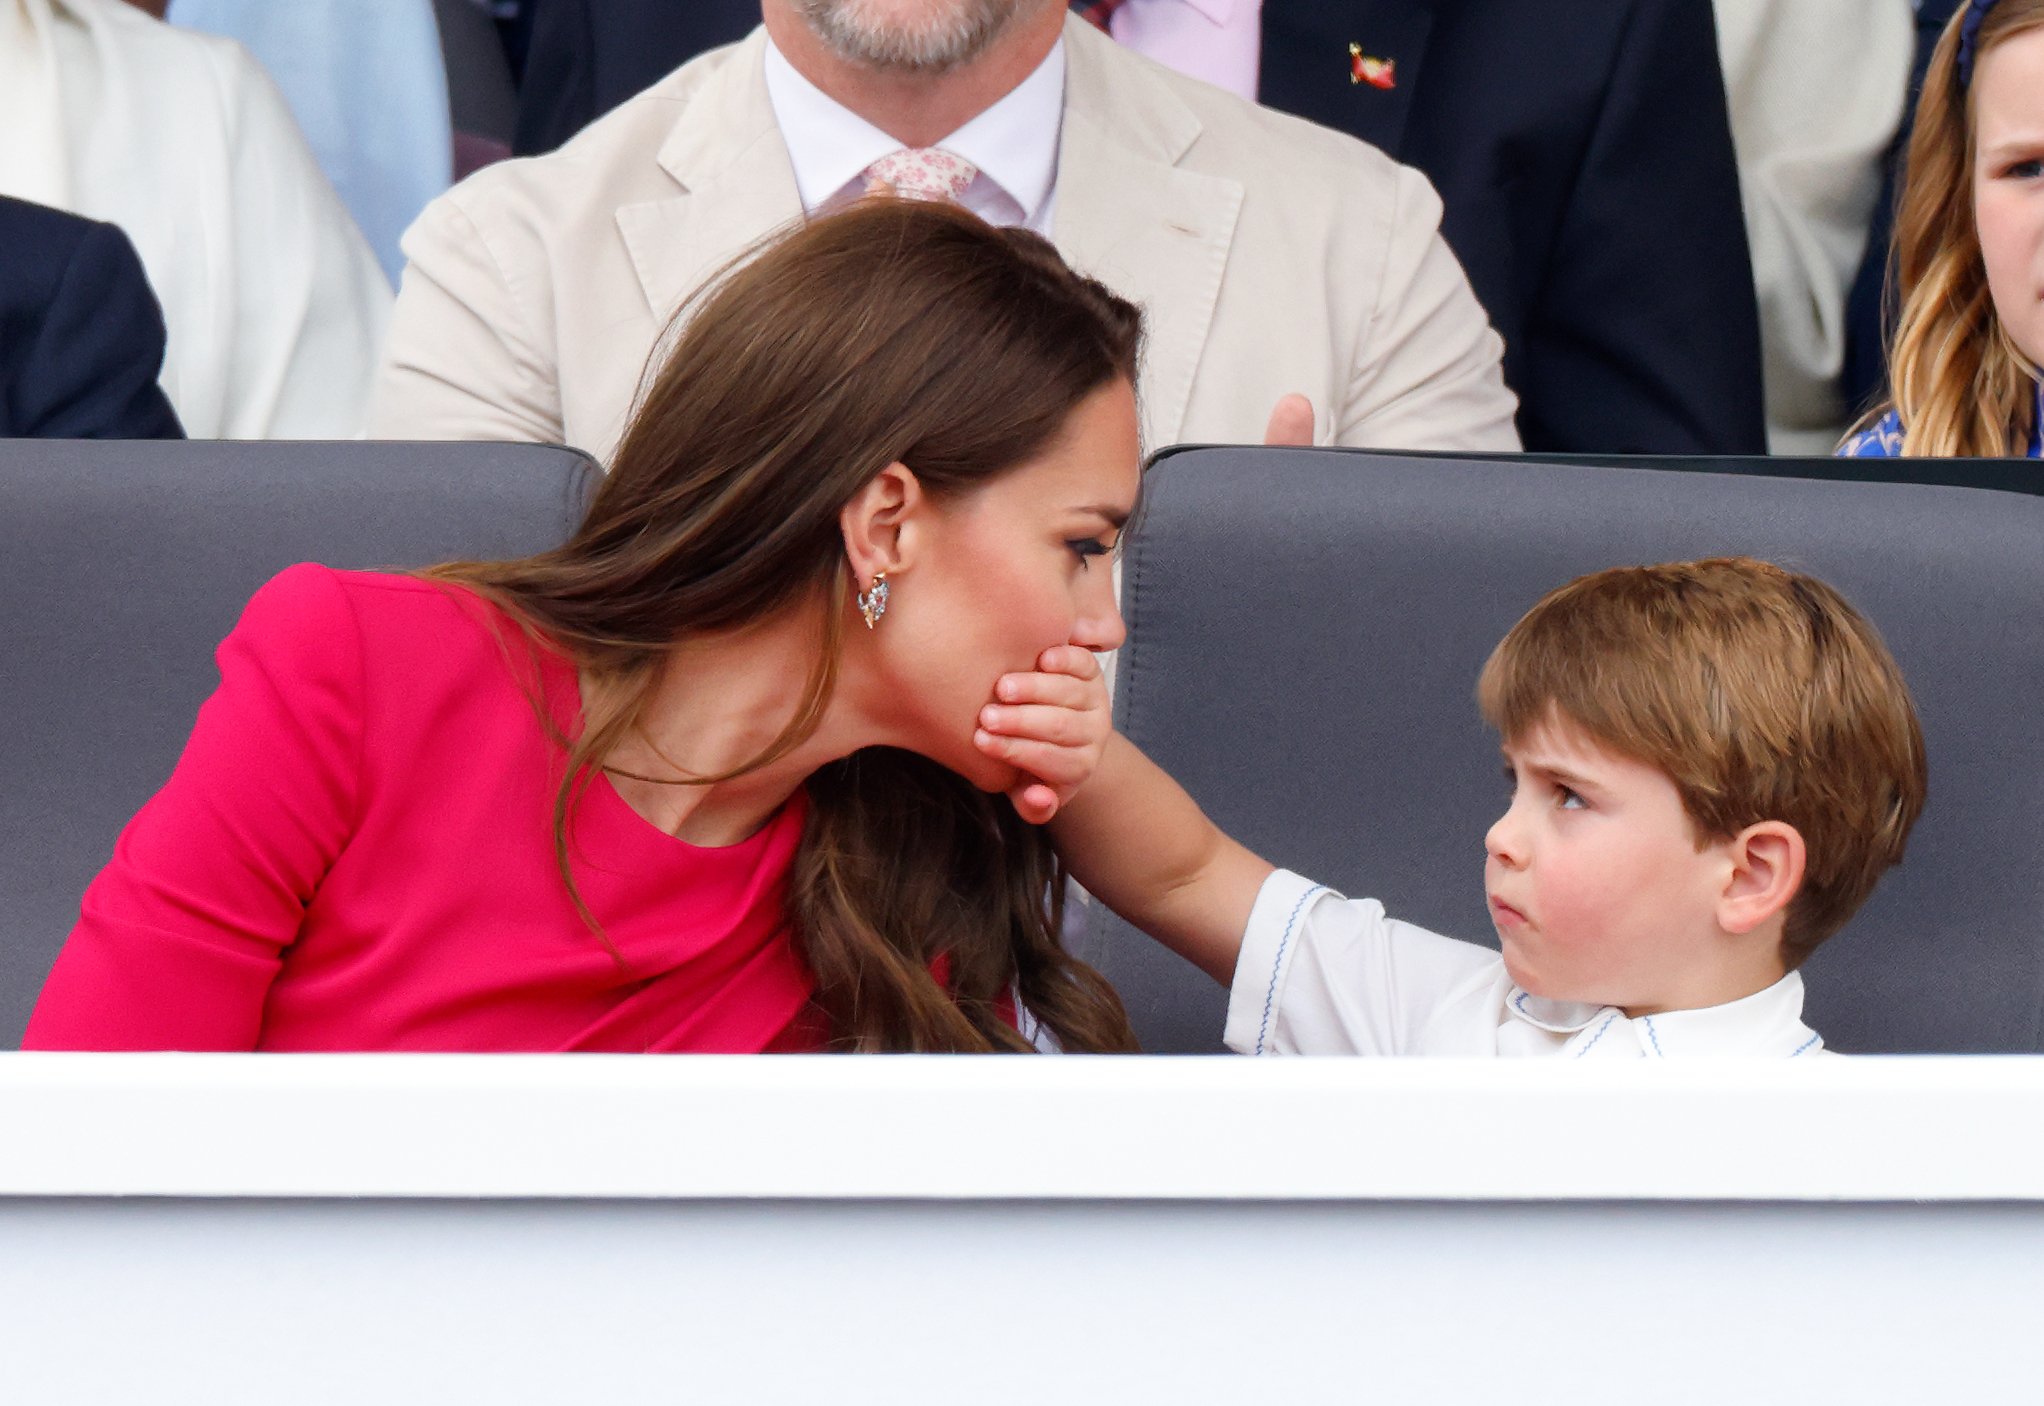 Prince Louis covers his mom Kate Middleton's mouth with his hand during the Platinum Jubilee Pageant